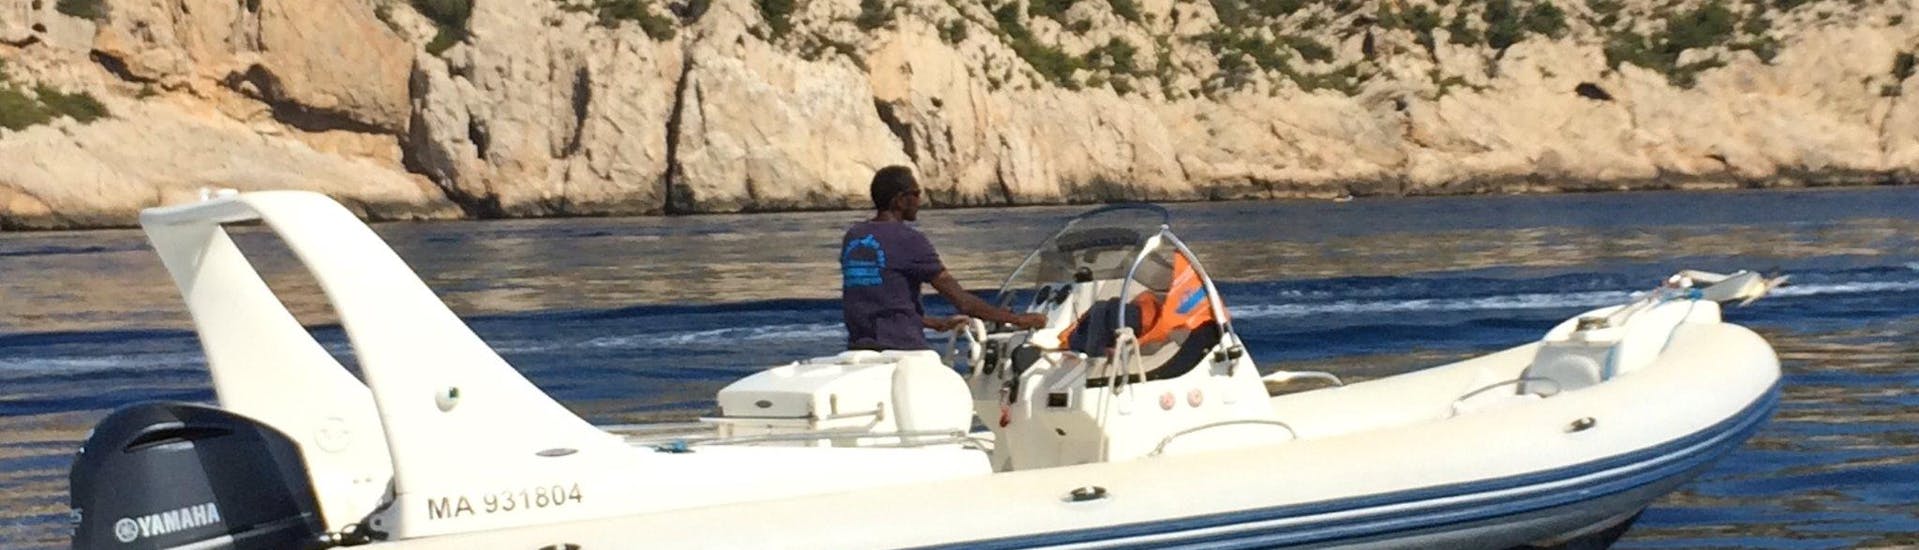 View of the boat during a Private Boat Trip to the Calanques from Marseille with Balade en Mer.